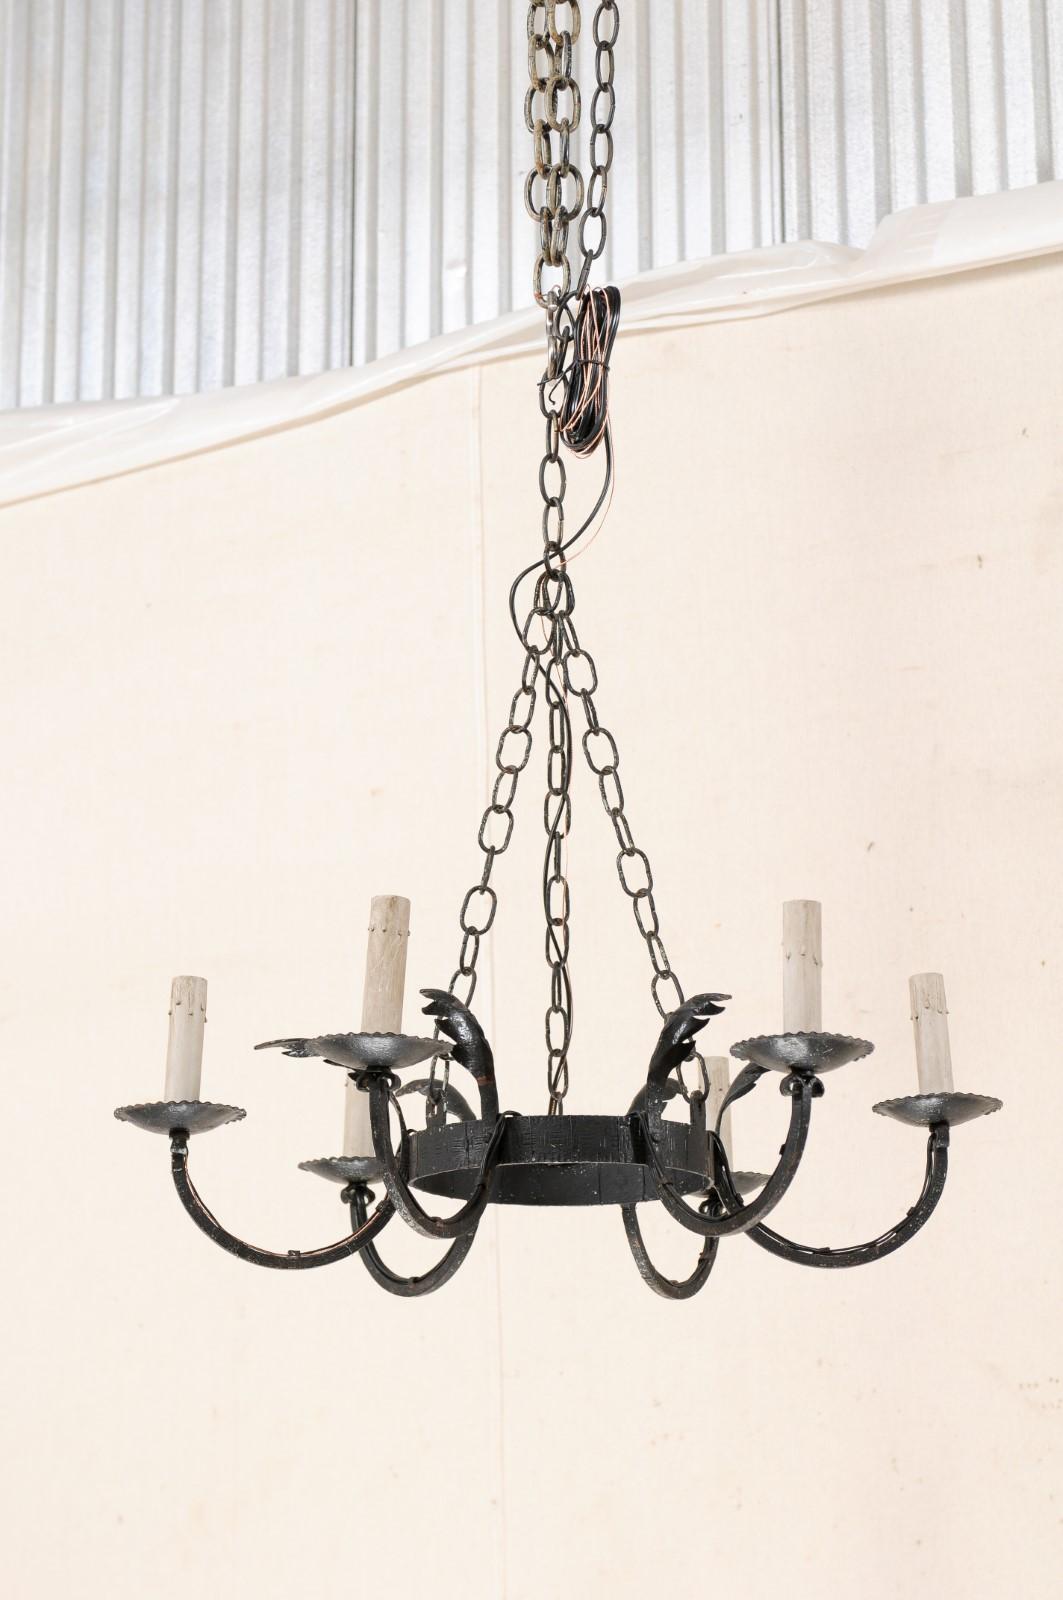 A French six-light circular-shaped iron chandelier from the mid-20th century. This vintage black iron chandelier from France features a central ring from which six c-scrolled arms are positioned reaching outwardly about it's perimeter, each adorn in